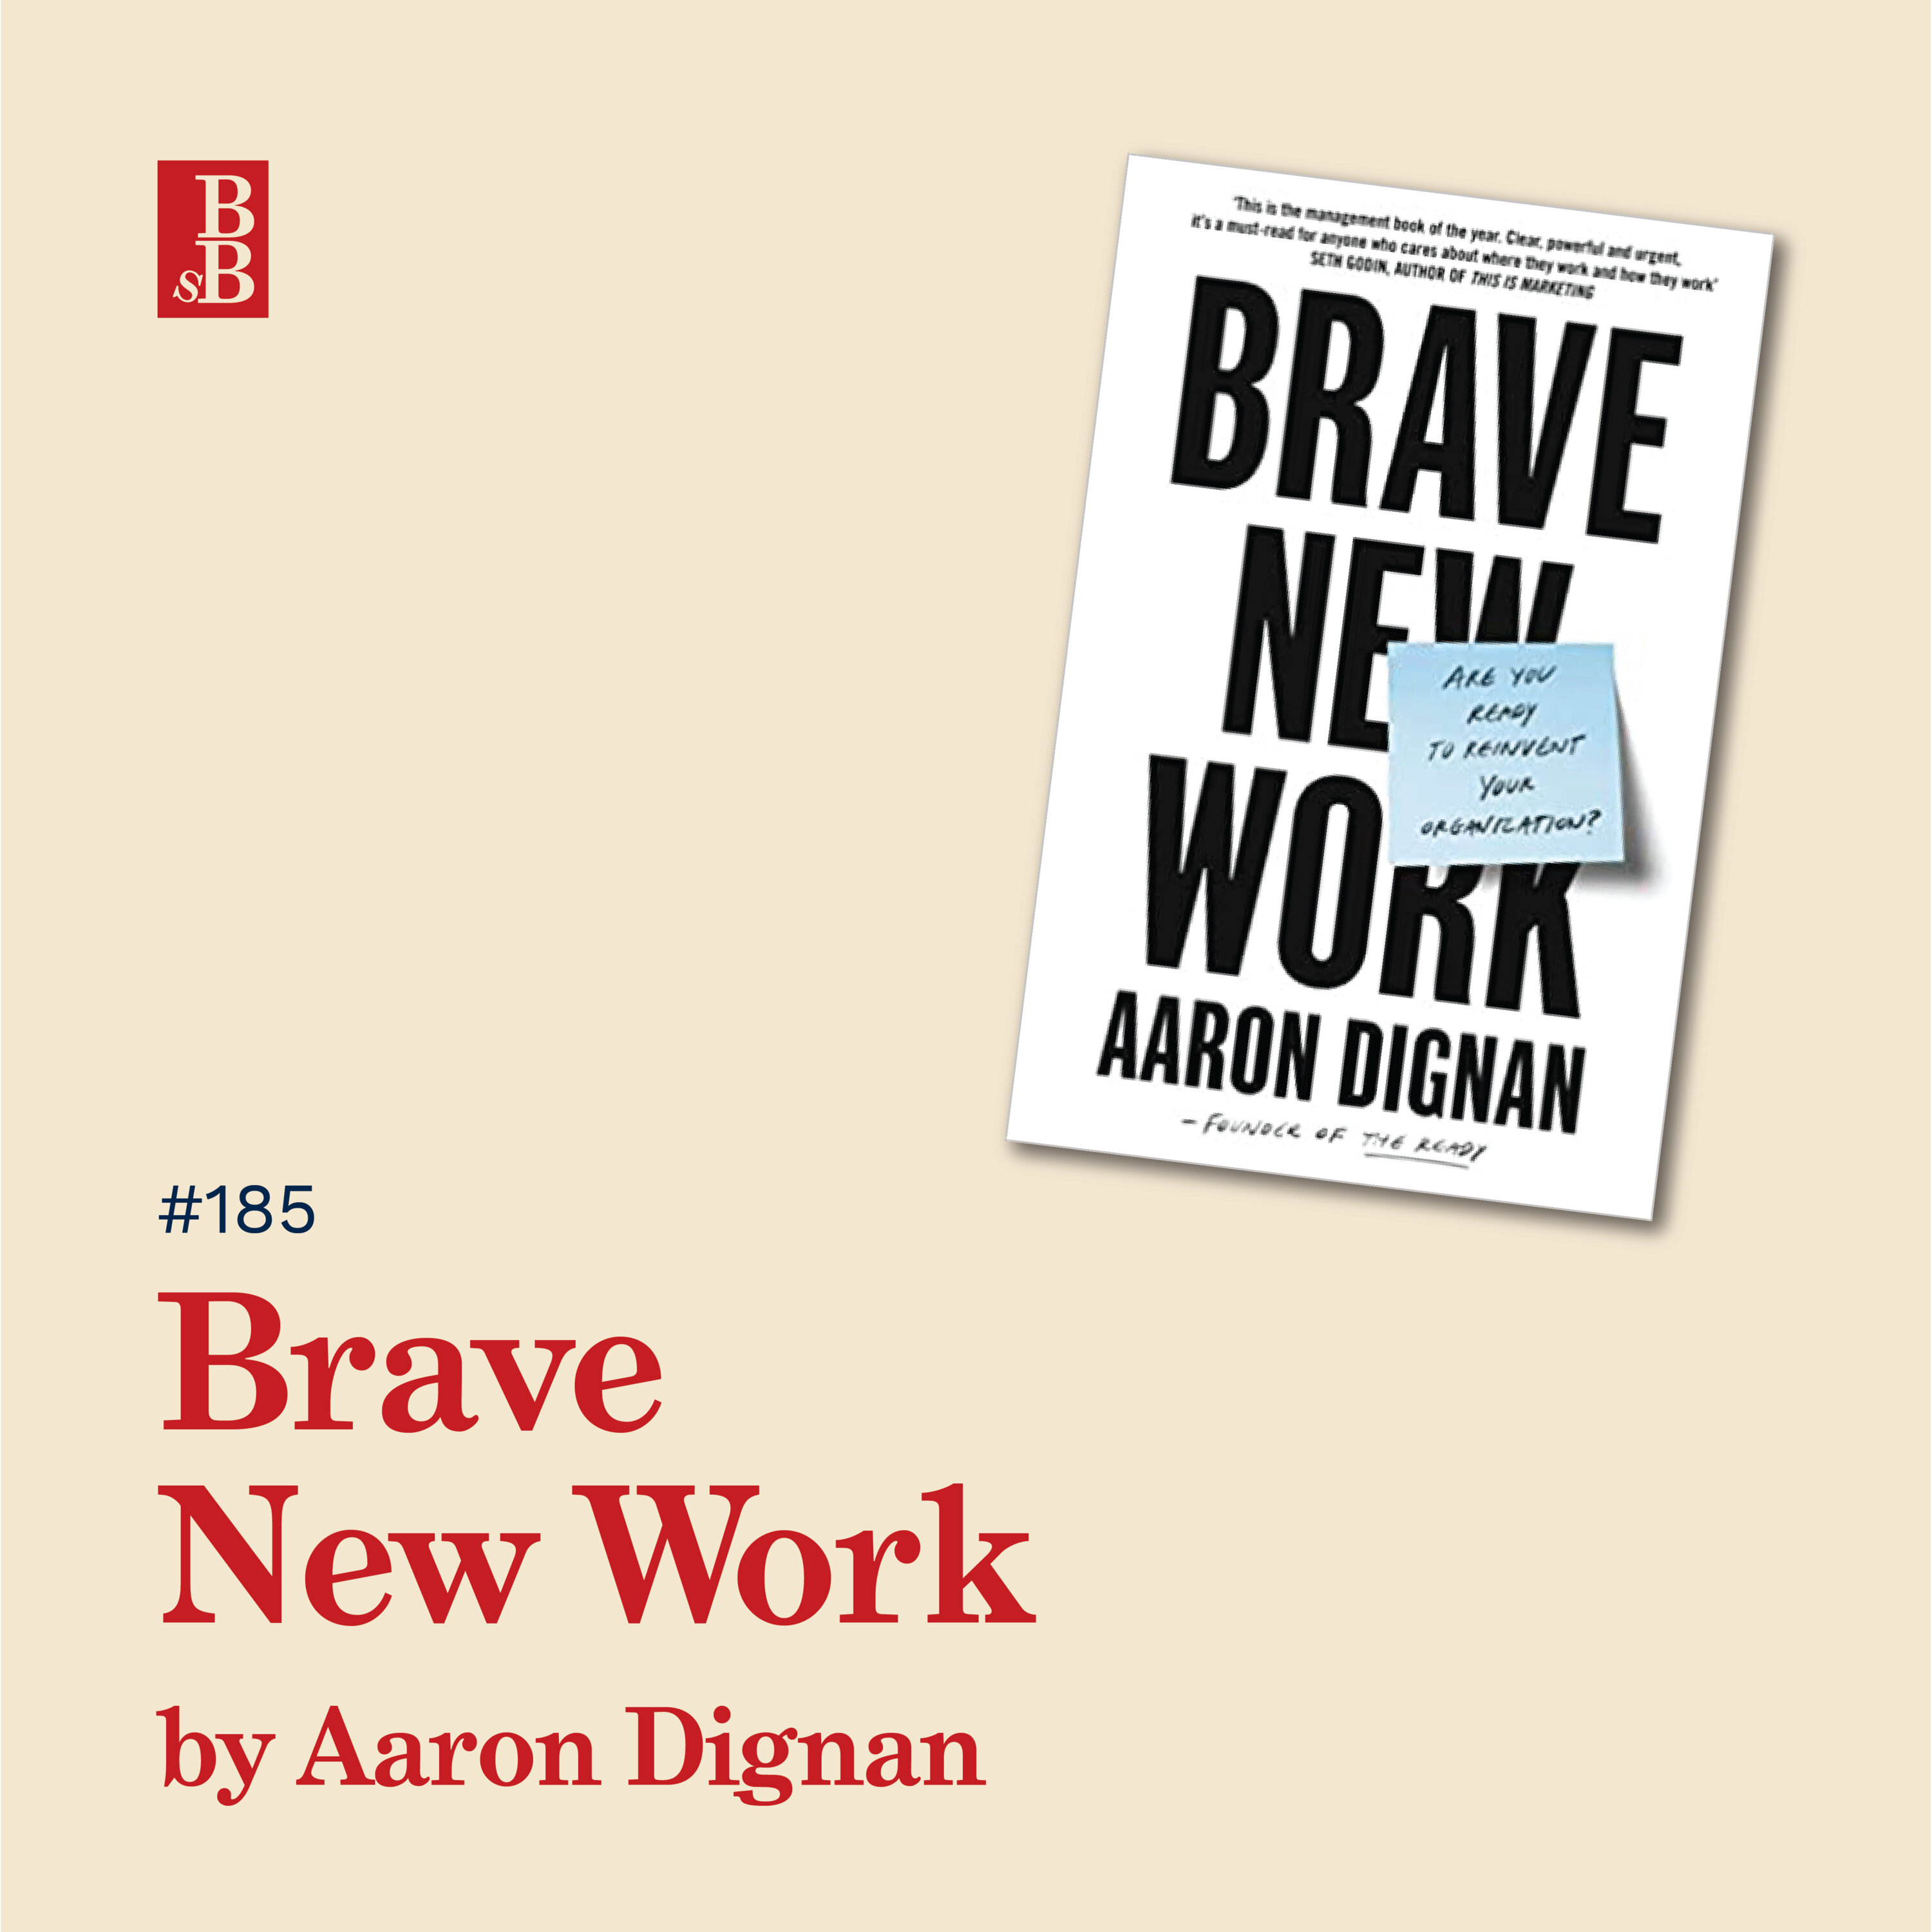 Brave New Work by Aaron Dignan: How to radically rethink the way you work Image